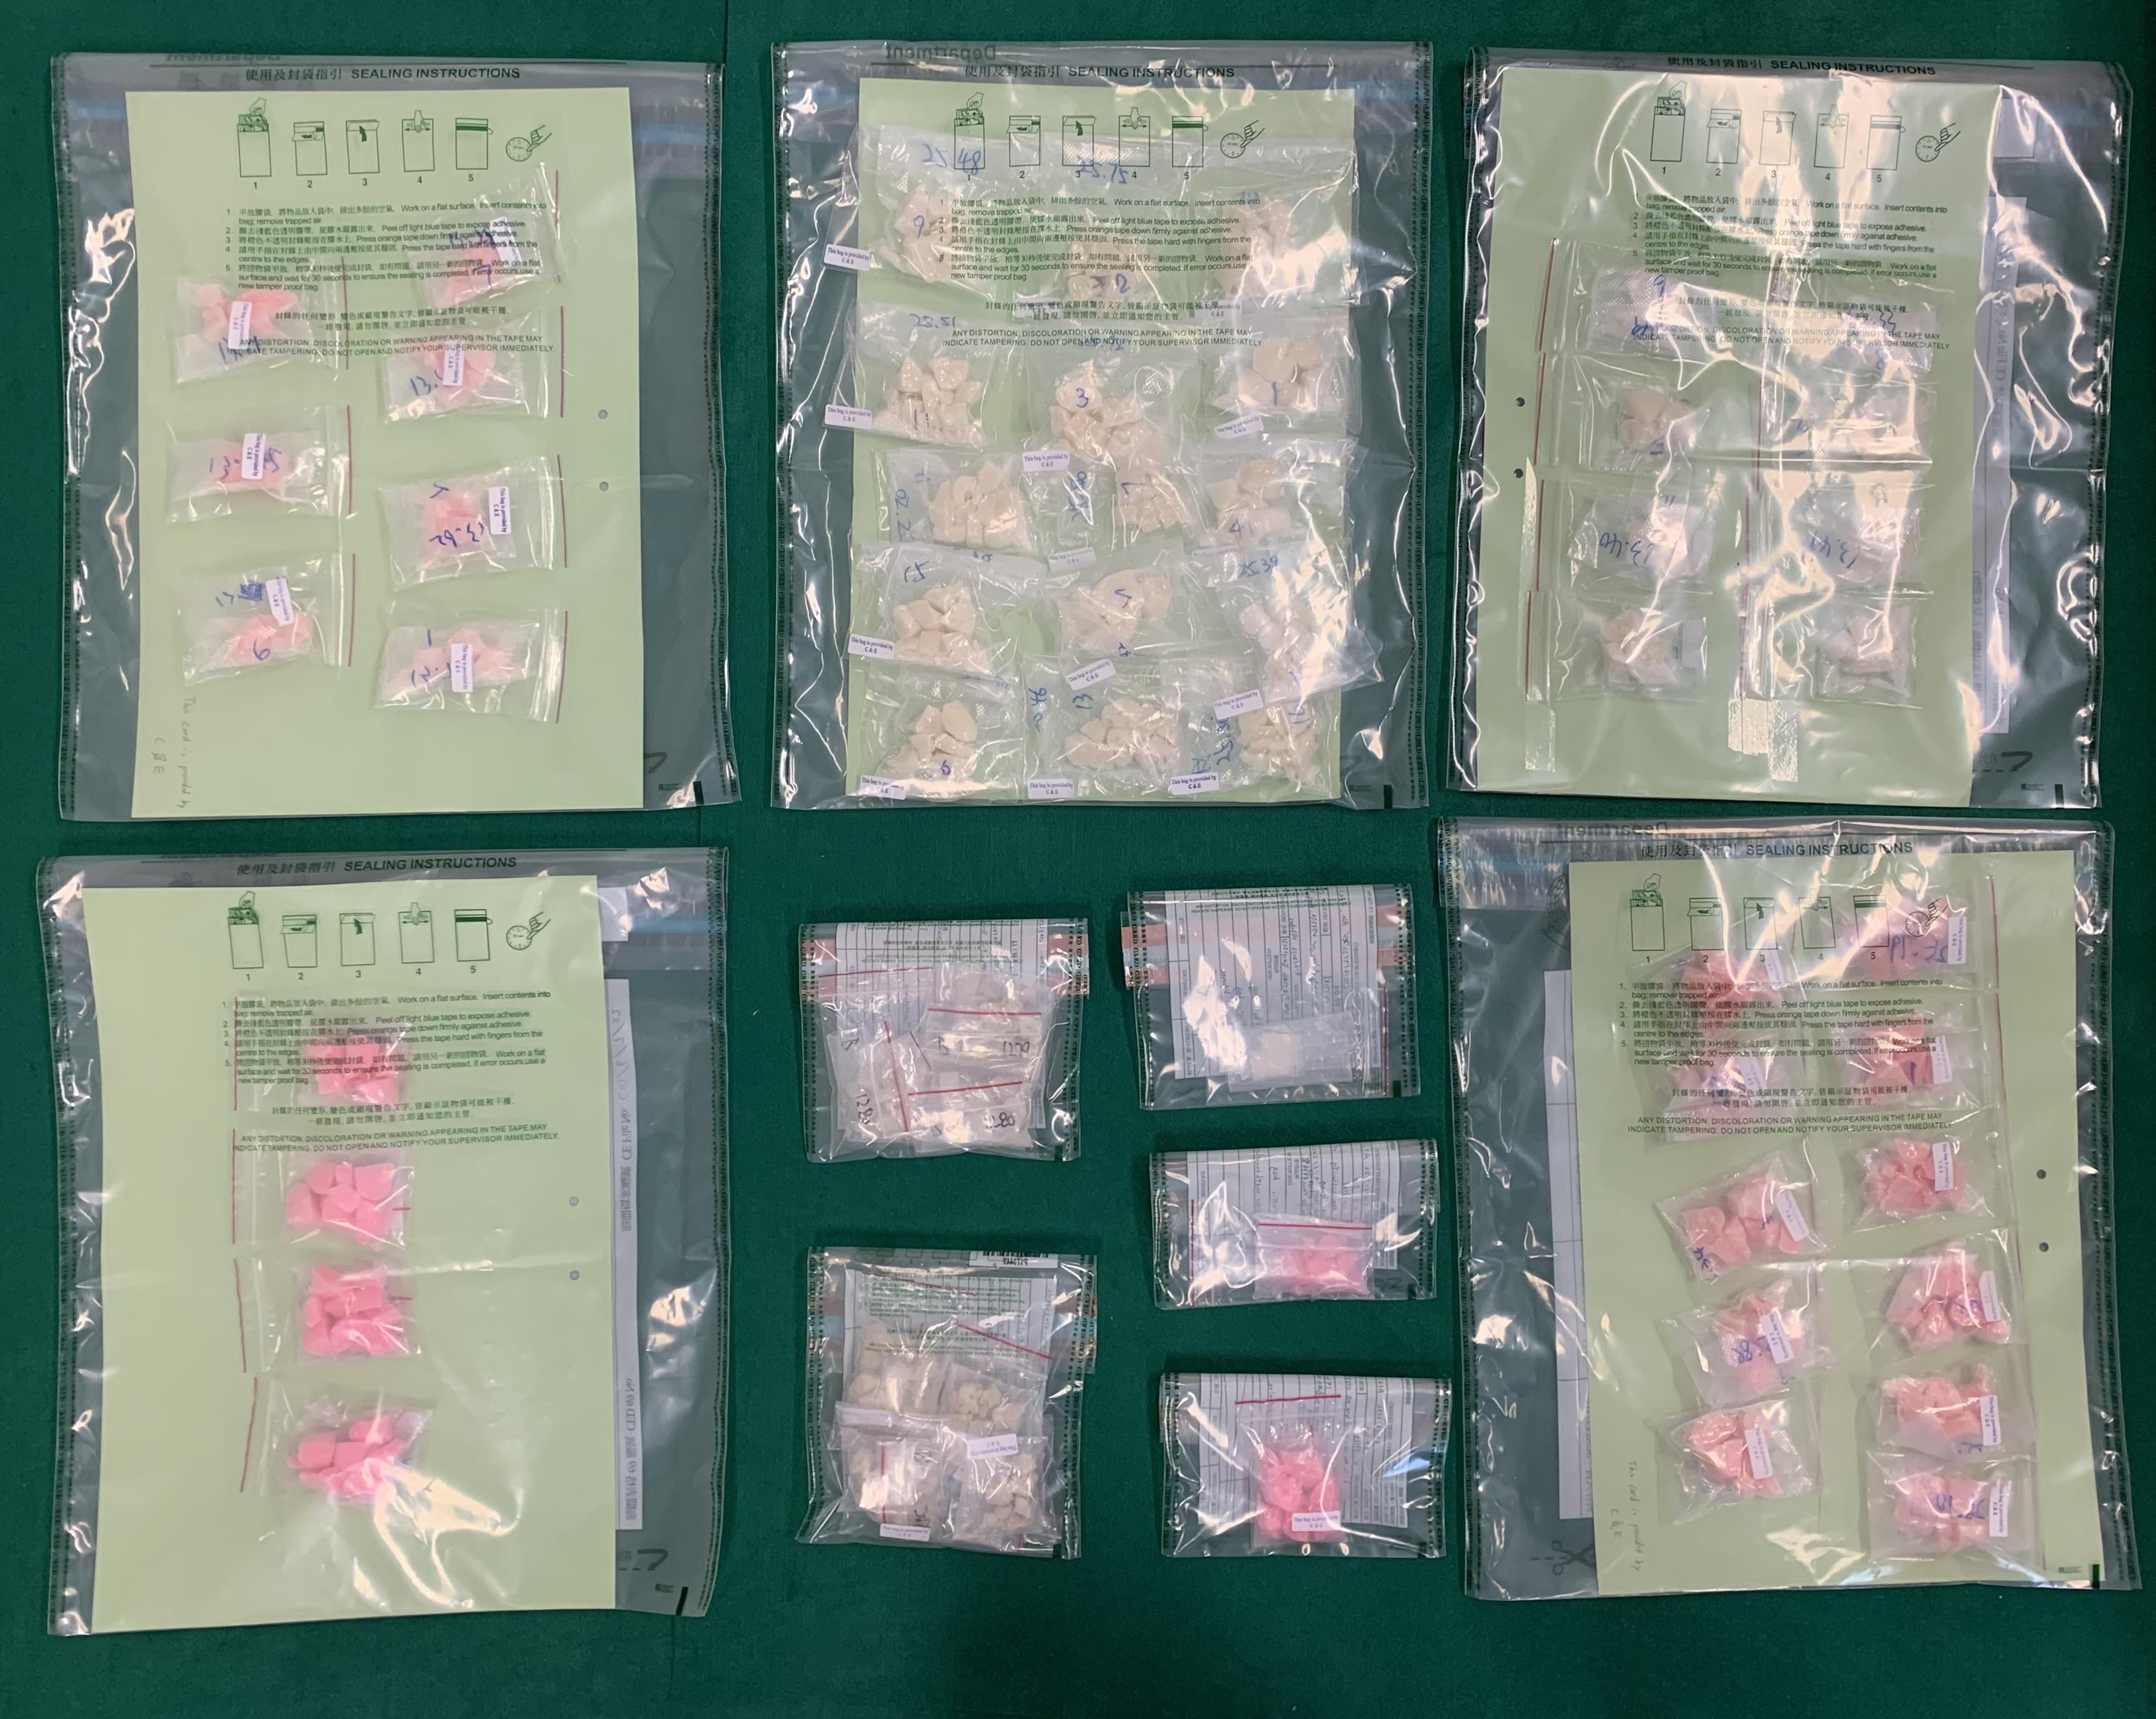 Hong Kong Customs yesterday (June 9) seized about 1.2 kilograms of suspected crack cocaine and about 3 grams of suspected ketamine with a total estimated market value of about $1.8 million in Ta Kwu Ling. Photo shows the suspected dangerous drugs seized.